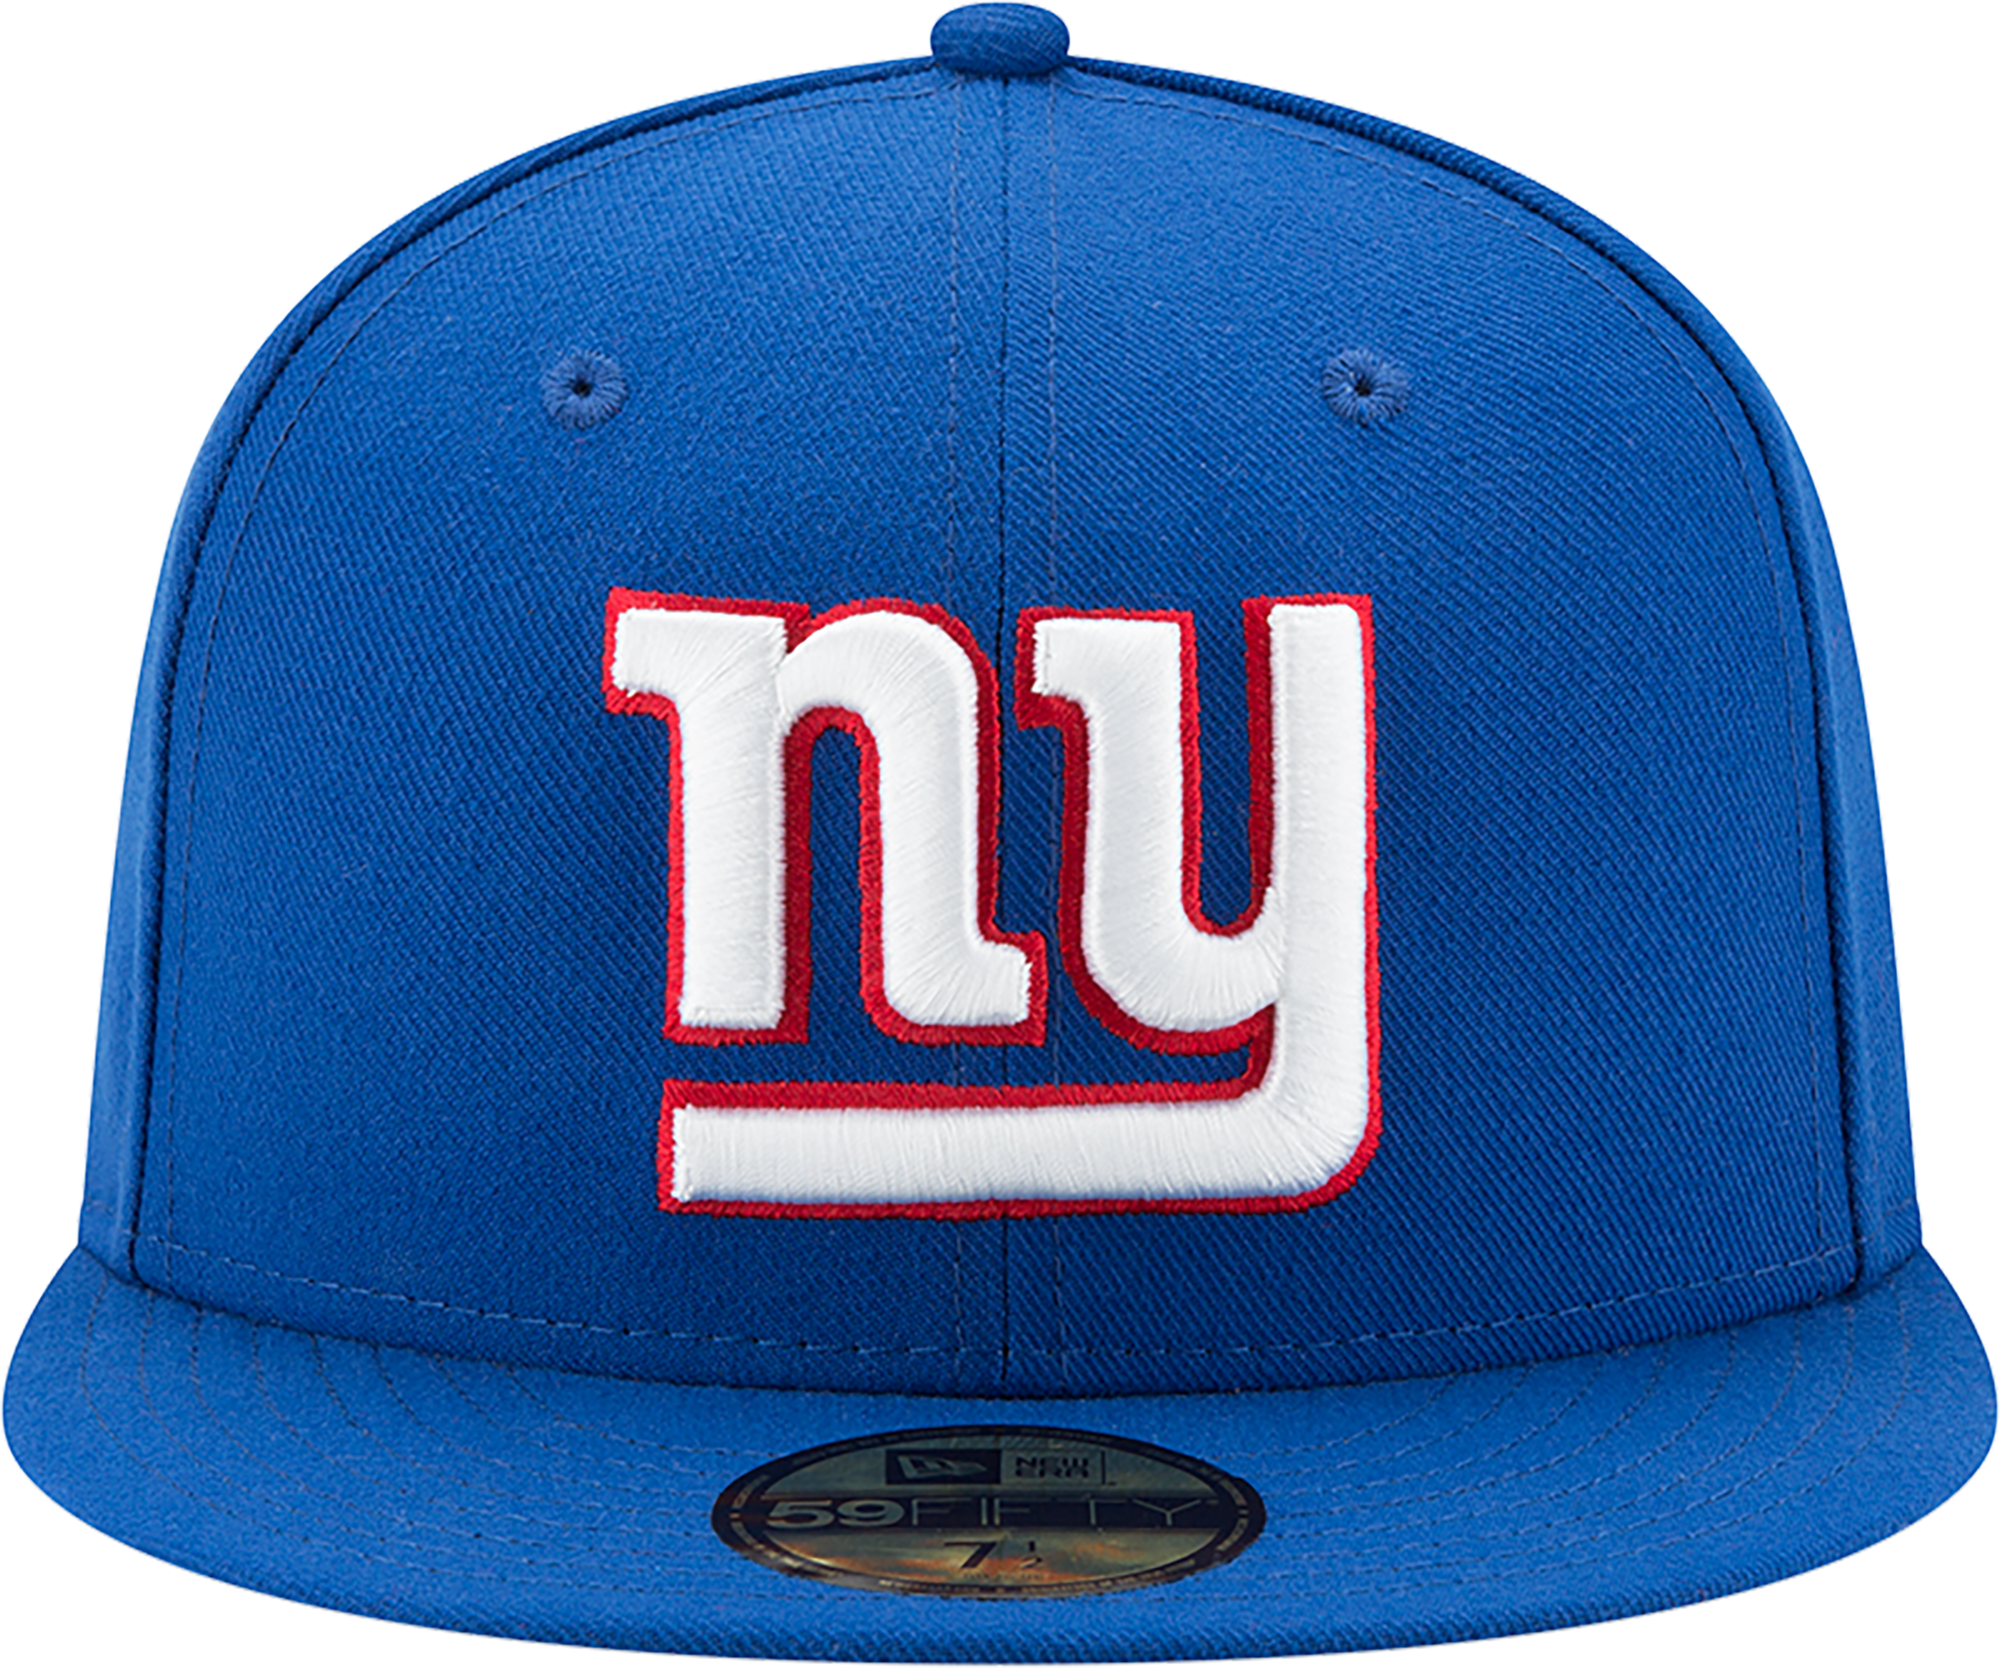 New Era Giants 5950 T/C Fitted Cap